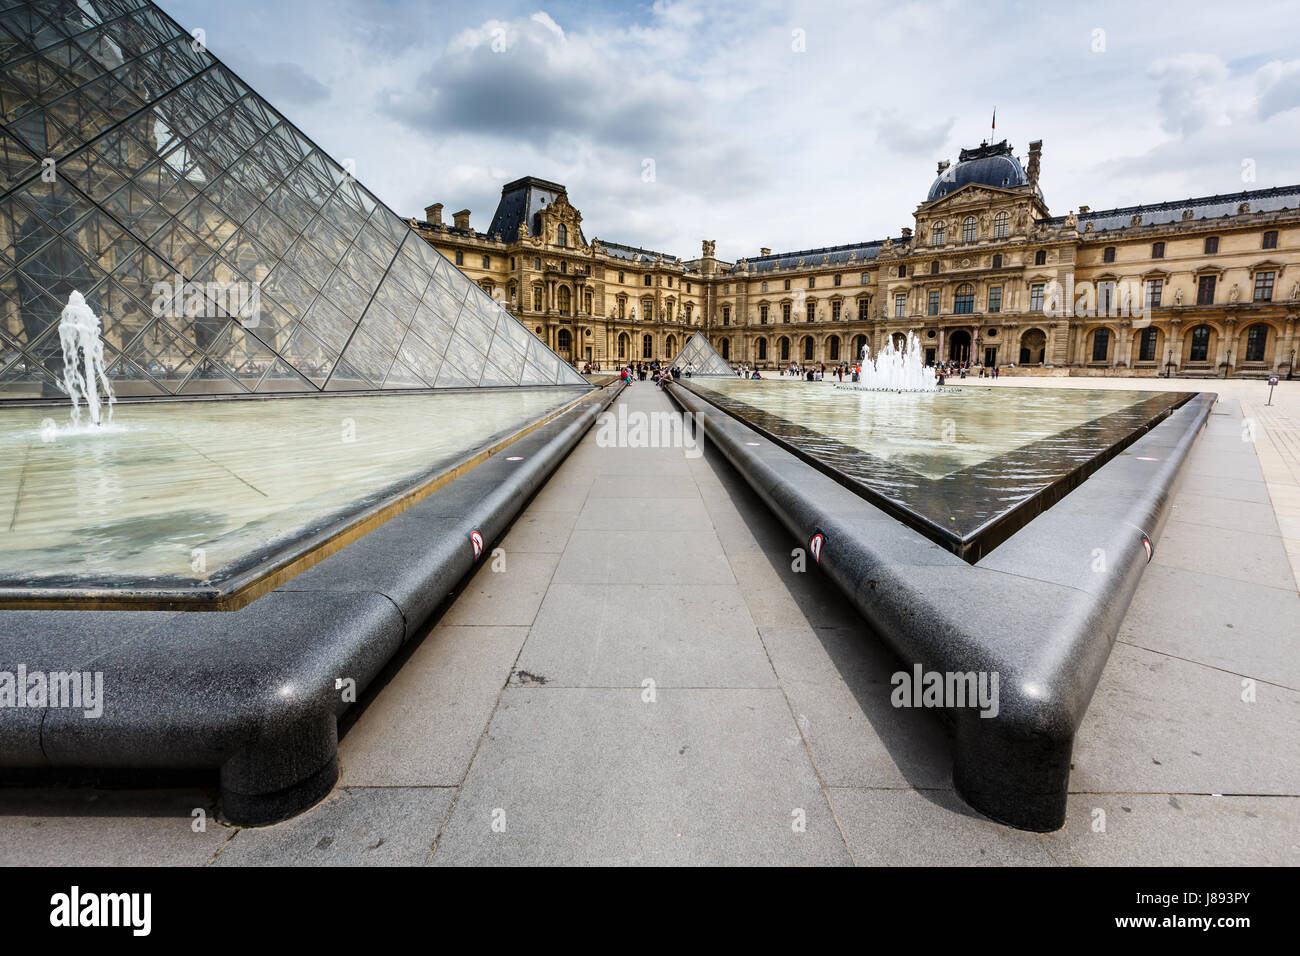 PARIS - JULY 1: Glass Pyramid in Front of the Louvre Museum on July 1, 2013. The Louvre is one of the world's largest museums in Paris. Nearly 35,000  Stock Photo